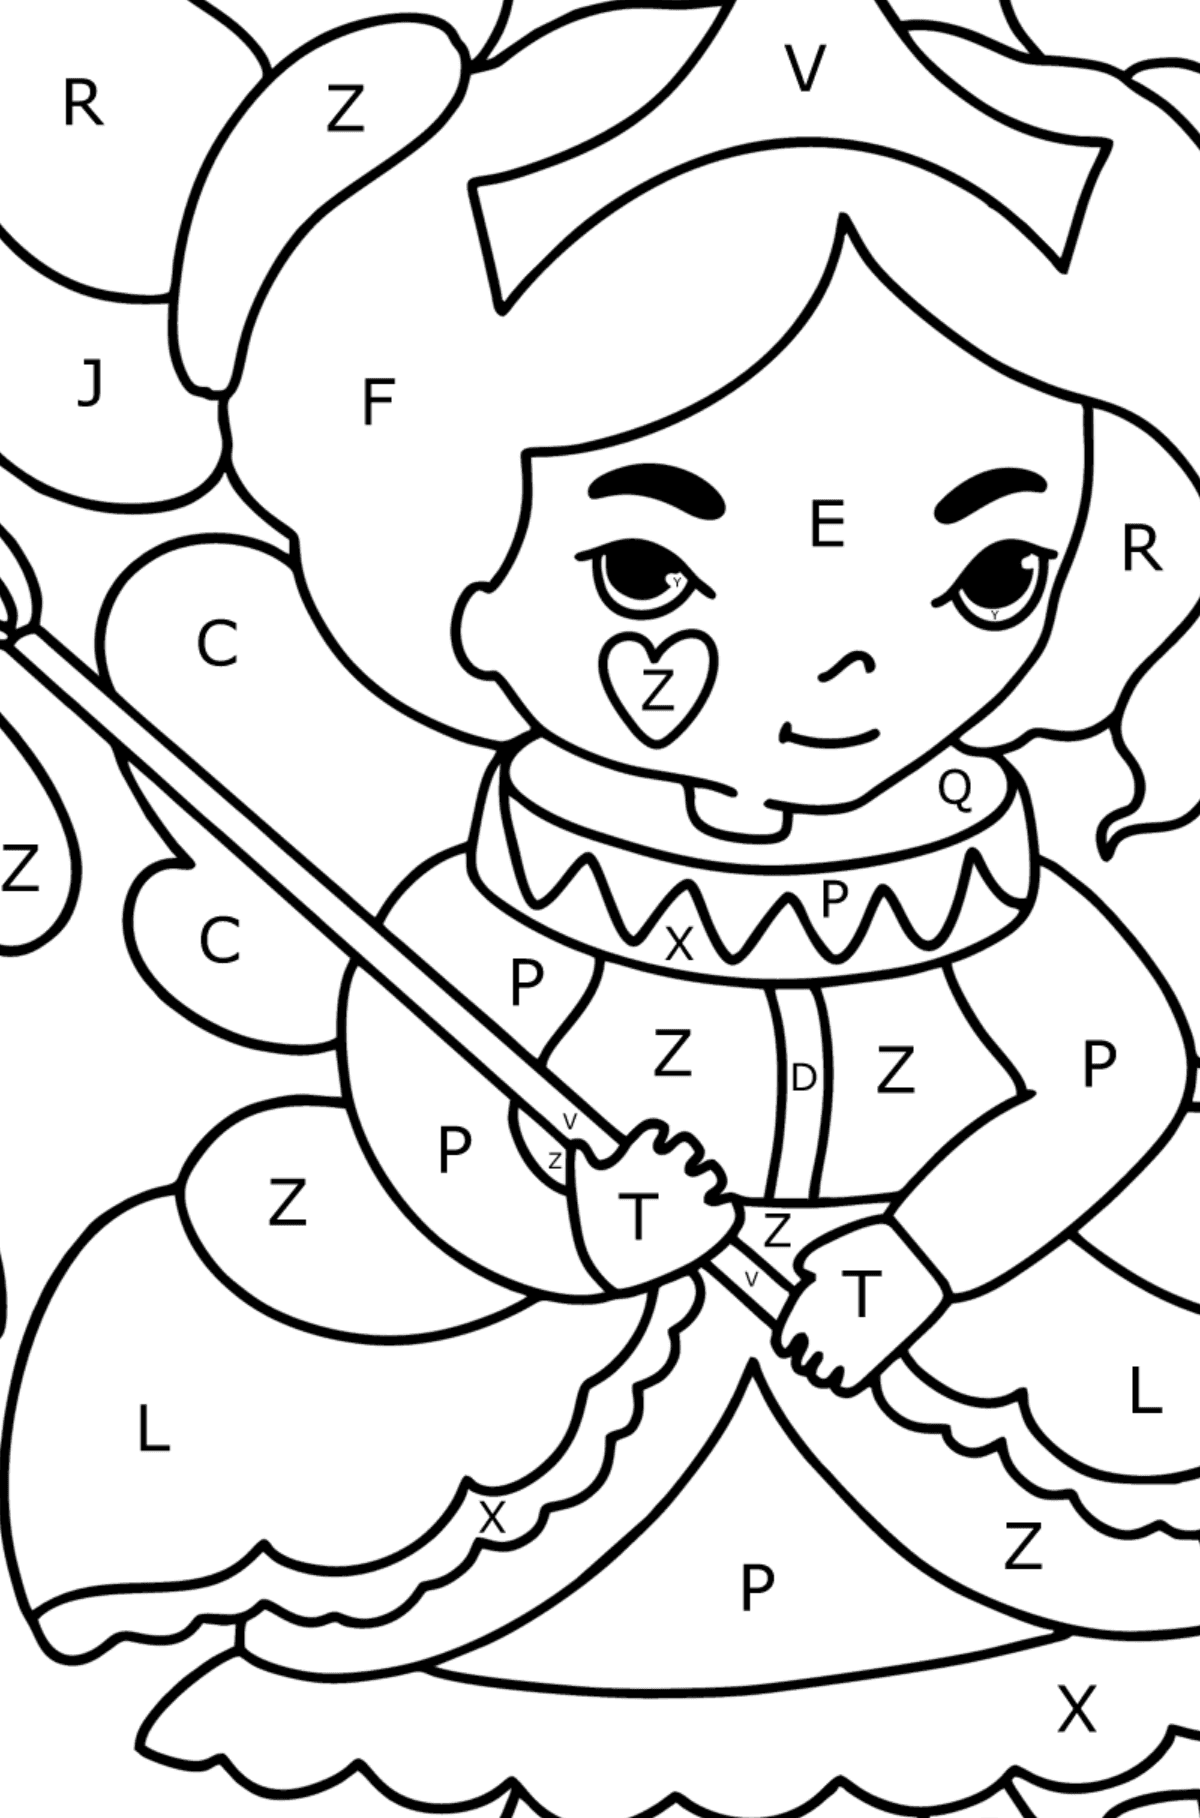 Fairy in a beautiful dress coloring page - Coloring by Letters for Kids